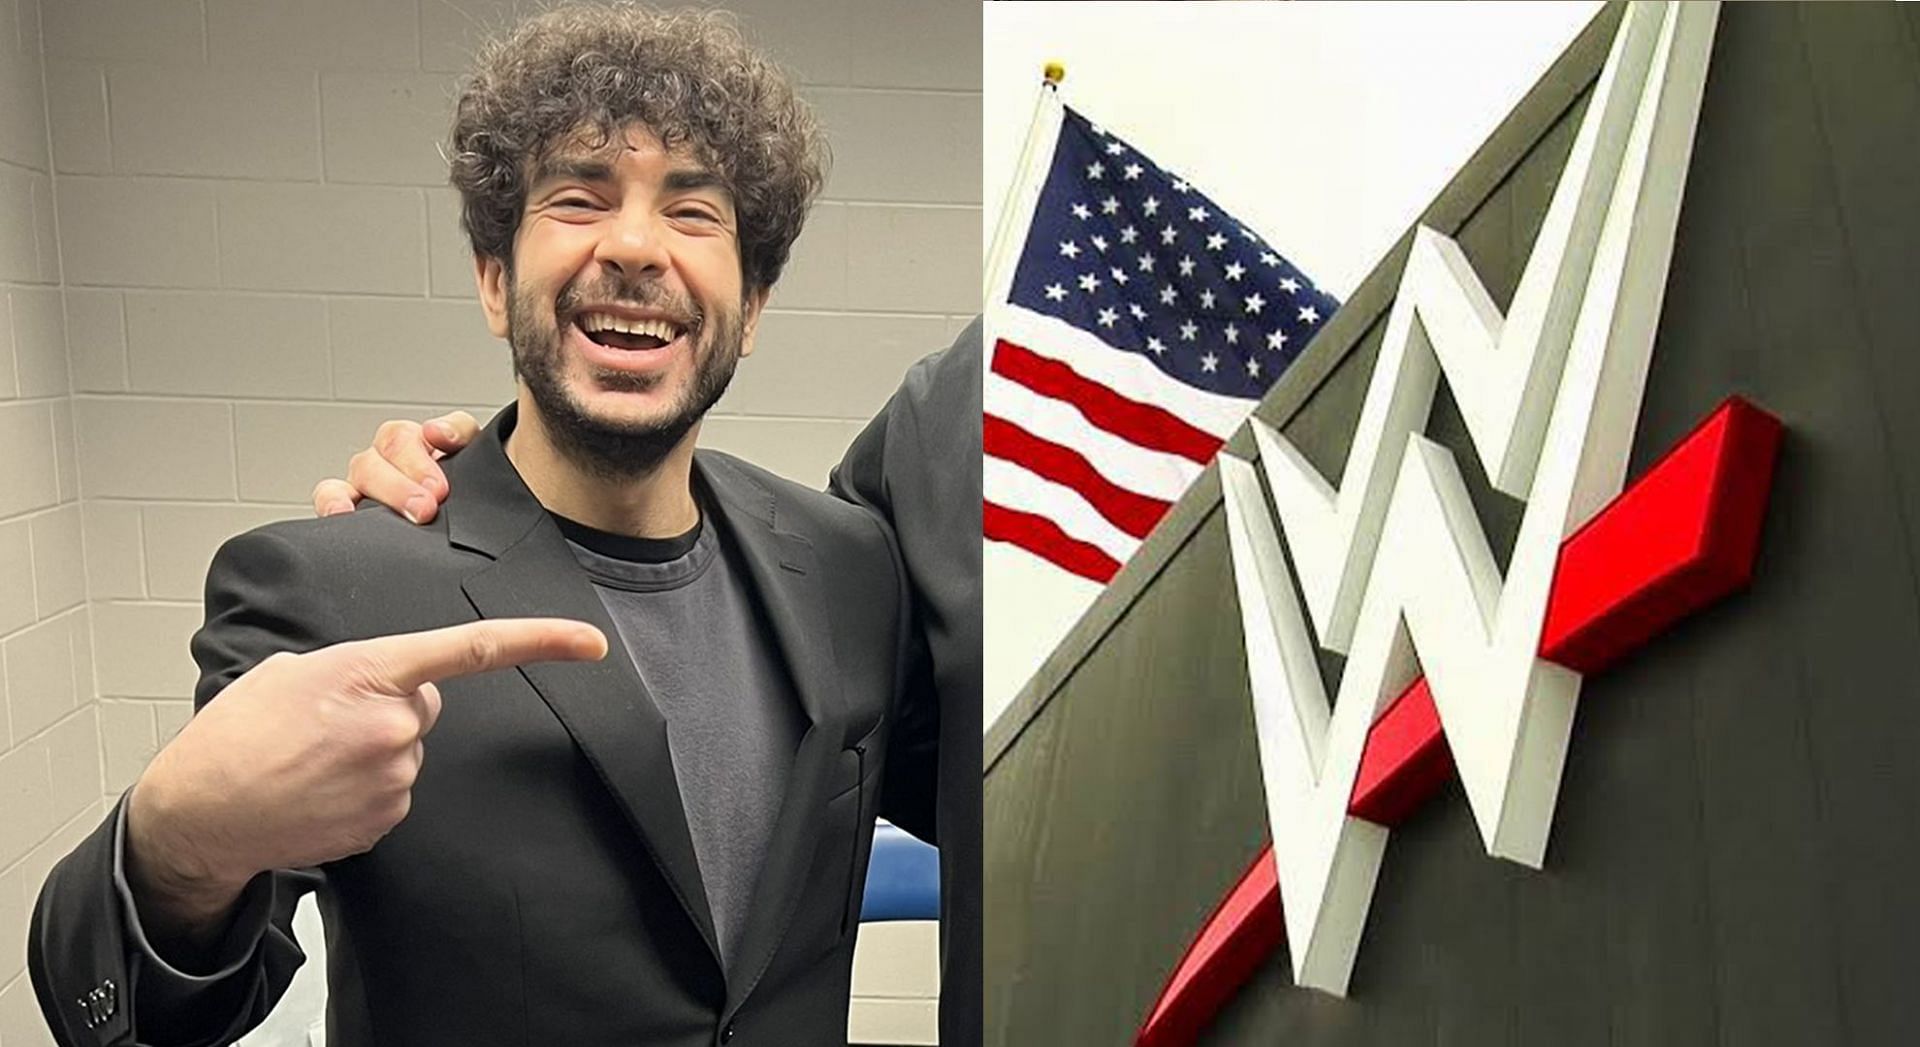 Tony Khan acquired one of the top former WWE talents for his AEW roster